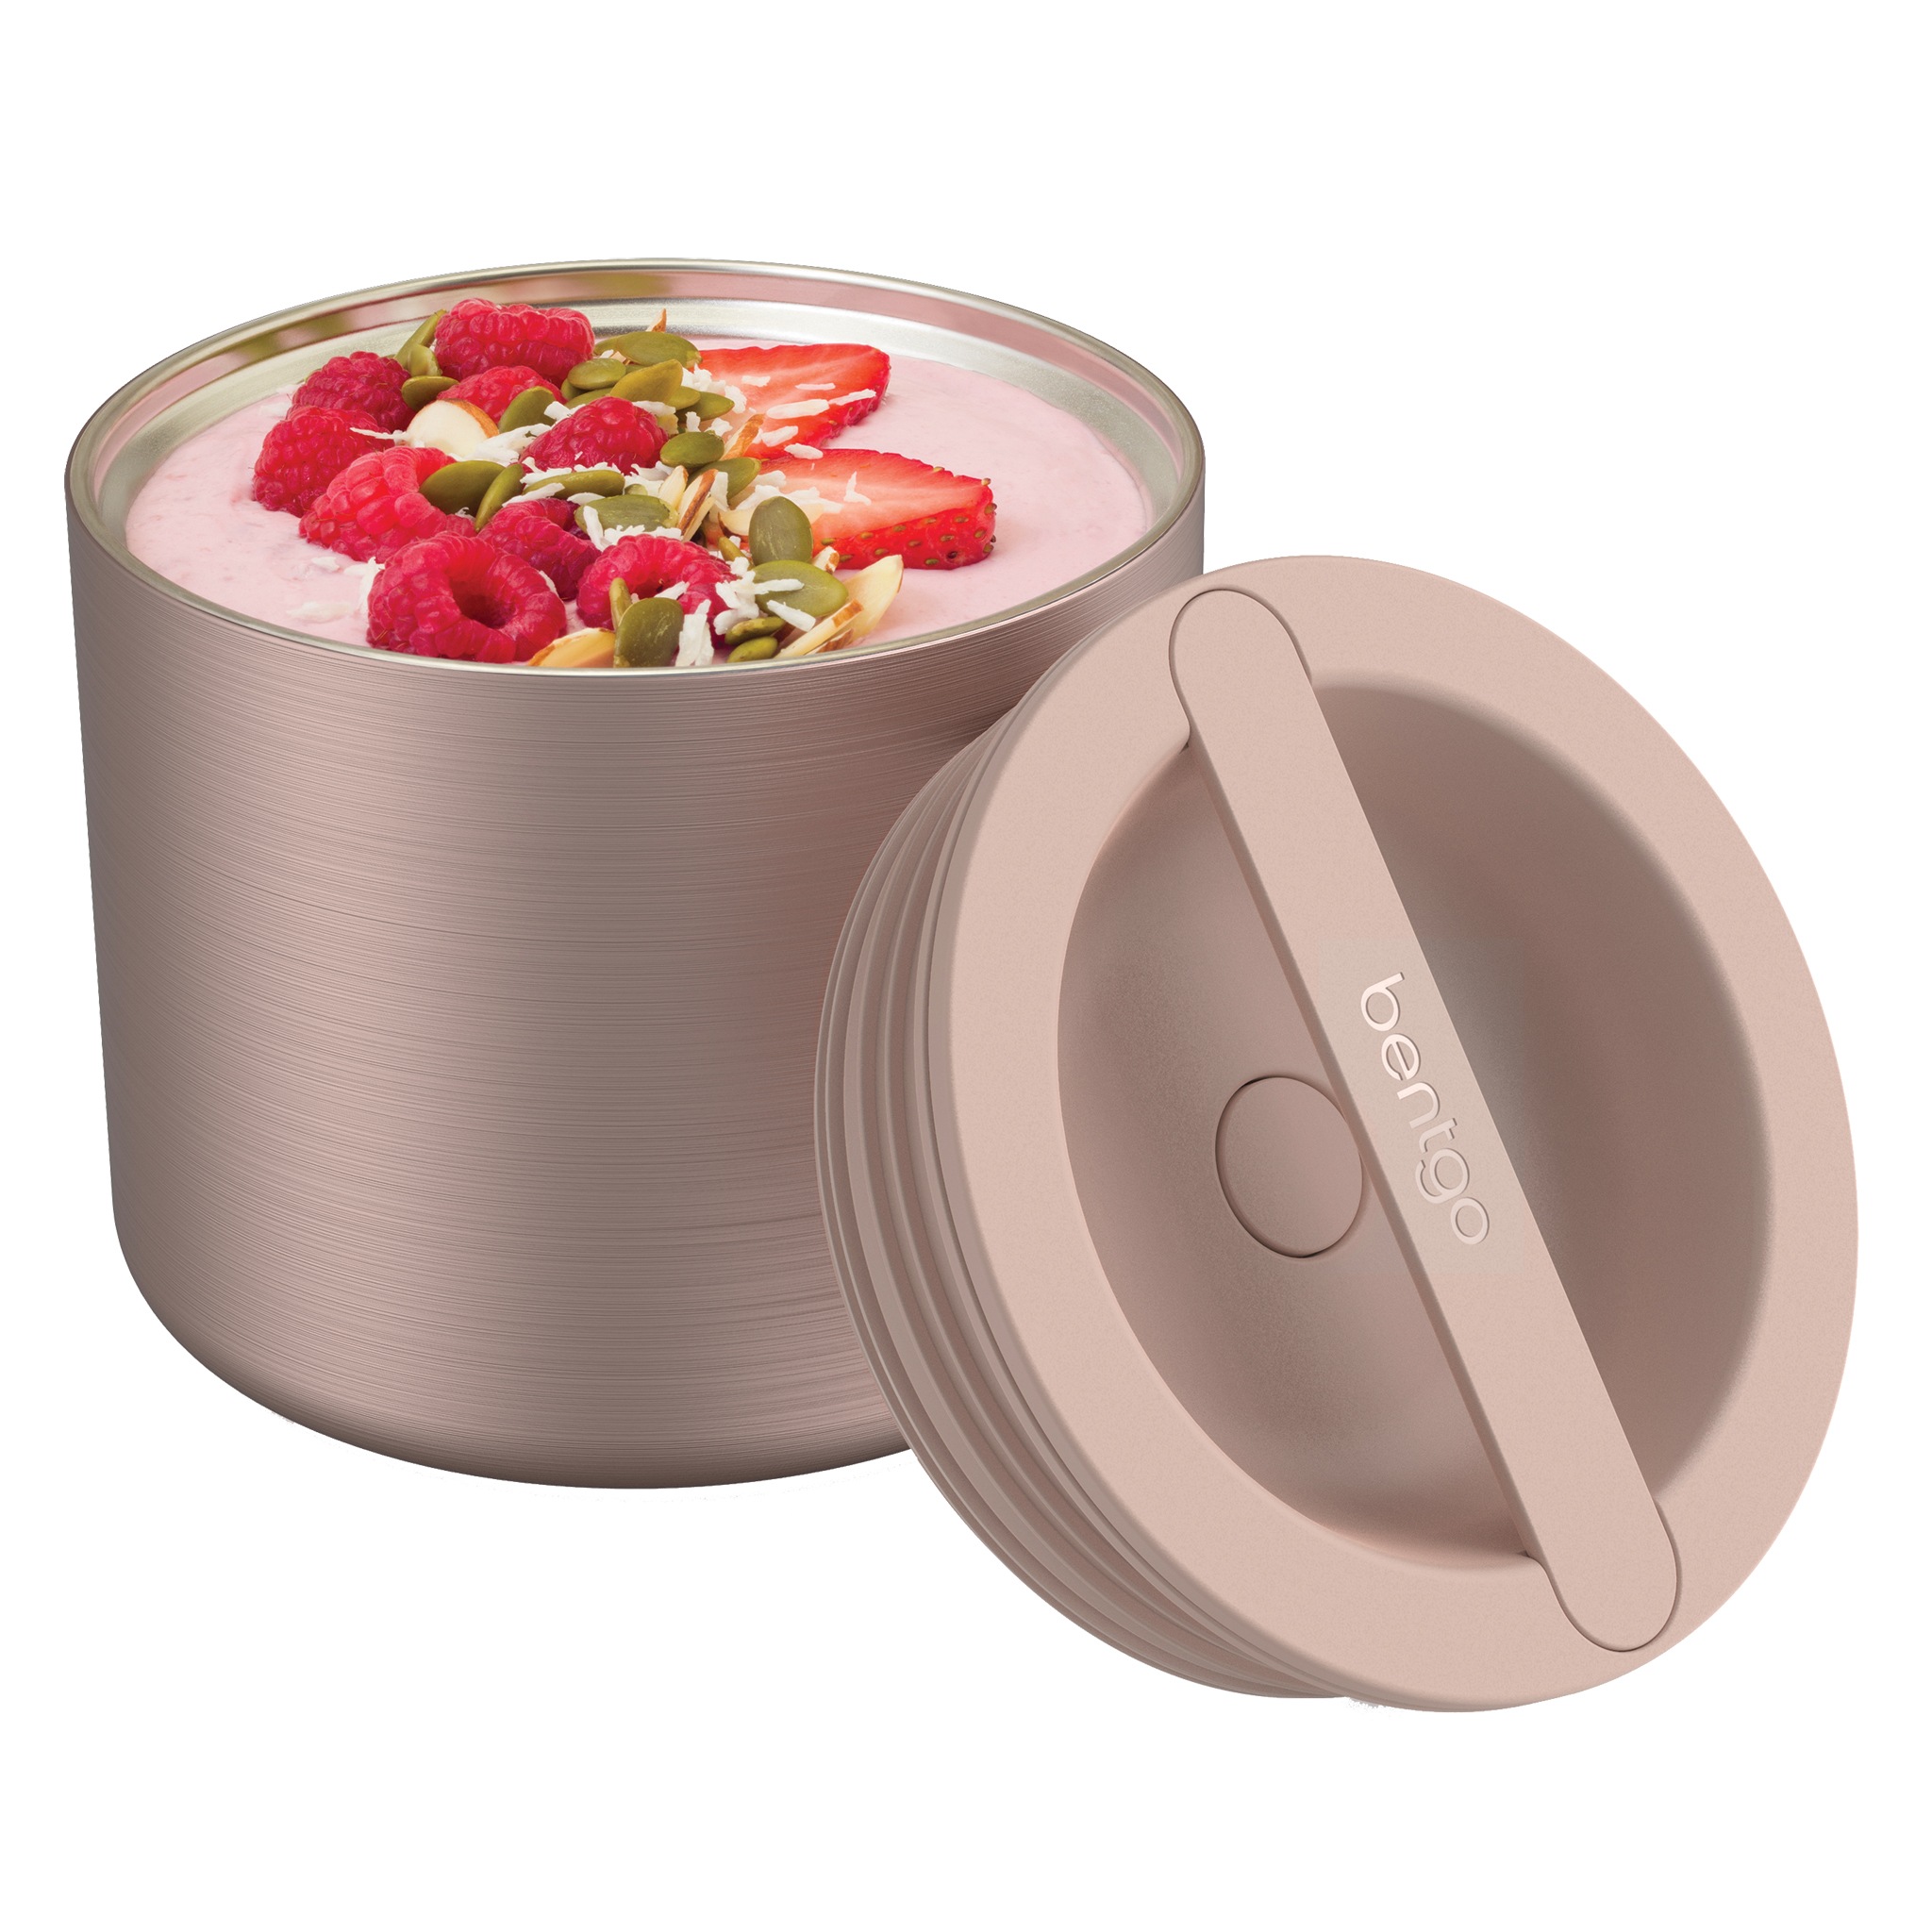 Bentgo Stainless Steel Insulated Food Container 560ml Rose Gold